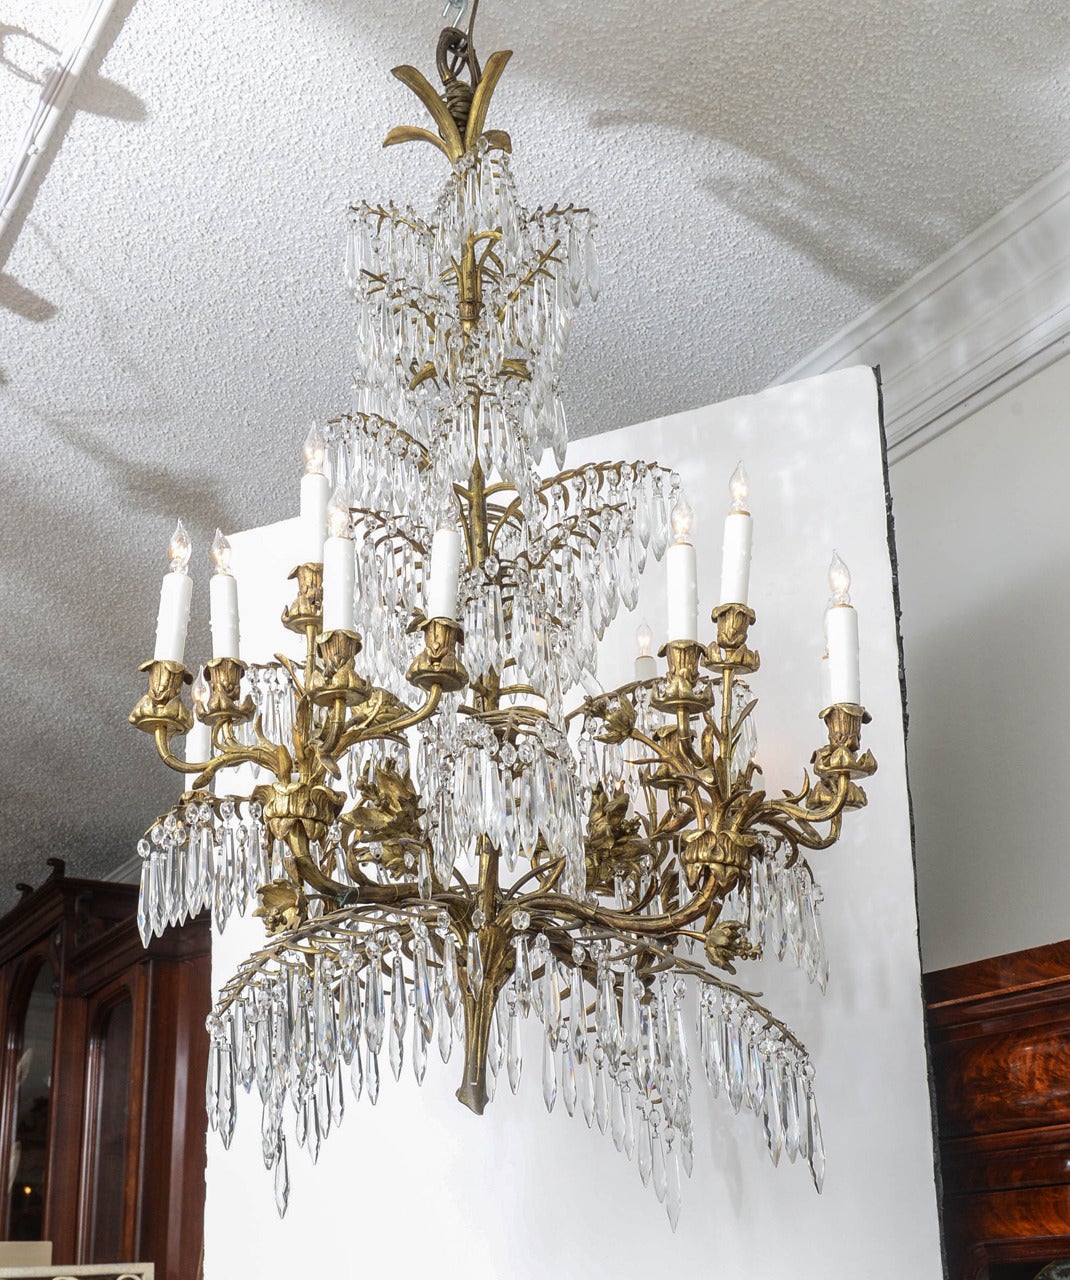 French gilt bronze and drop crystal eighteen-arm chandelier, in the Brighton style of a flowering tree with icicle prisms with wax sleeves, newly wired, original restored condition.